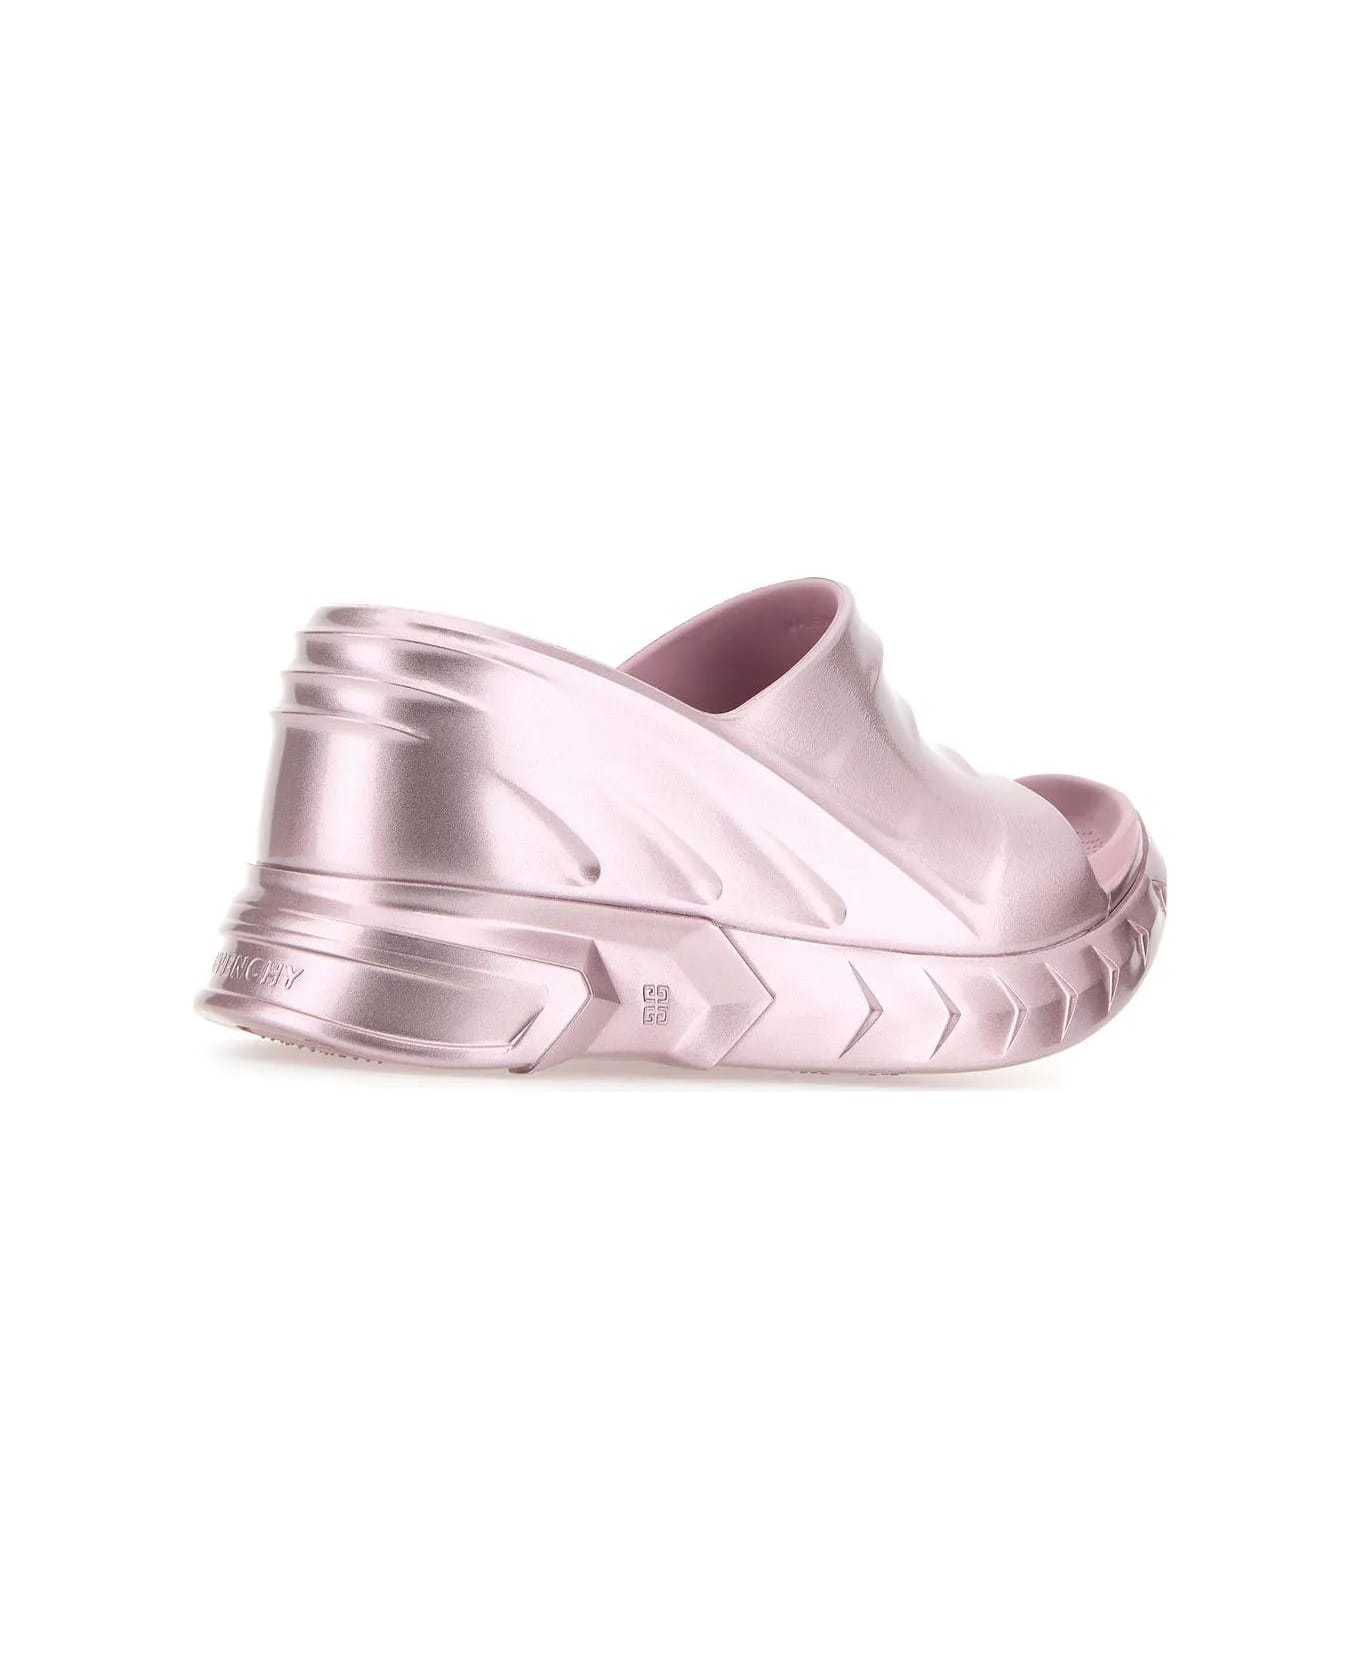 Givenchy Marshmallow Mules